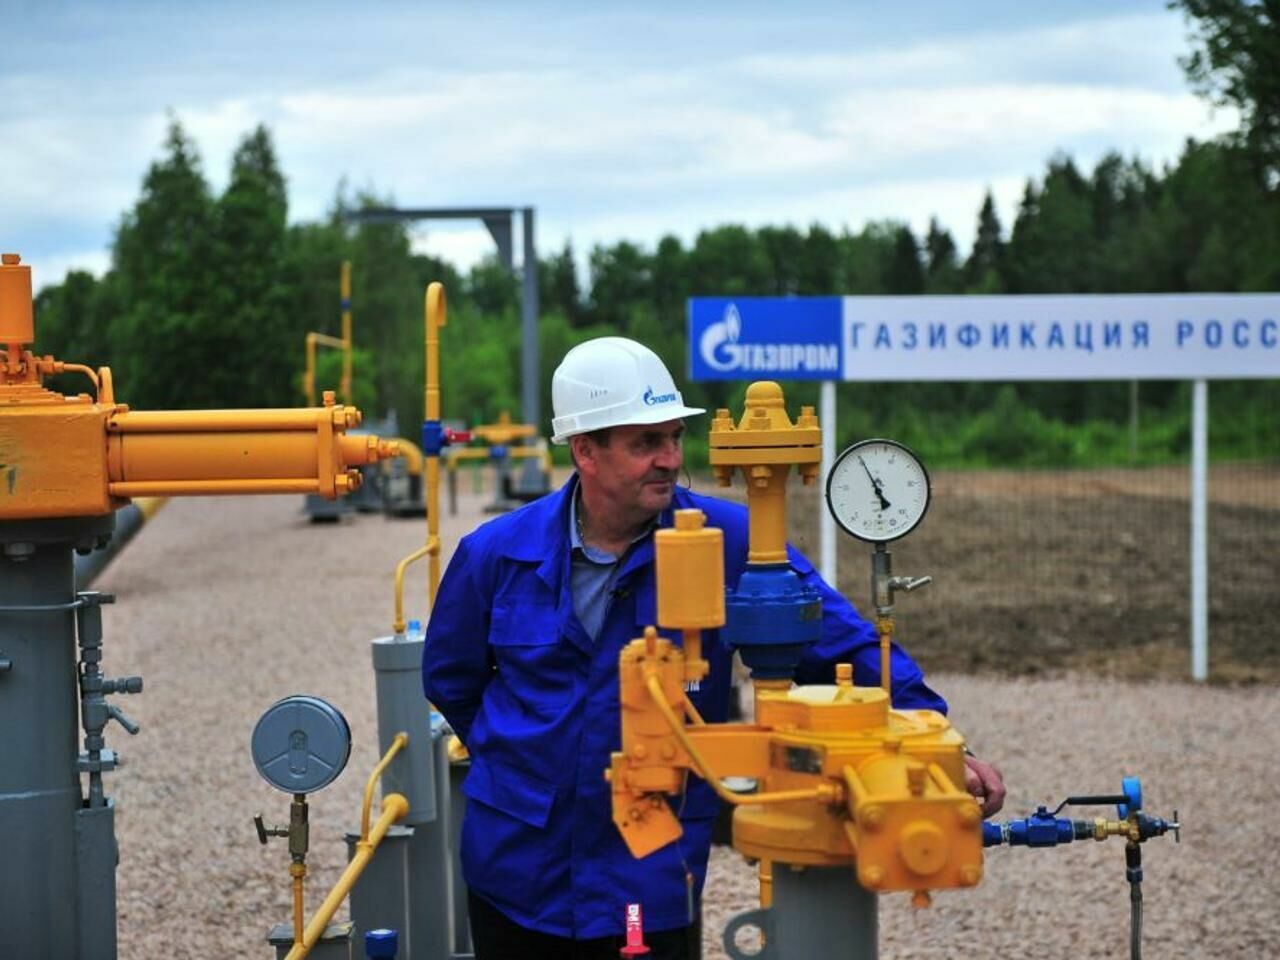 The State Duma adopted a law on free gas laying to sites